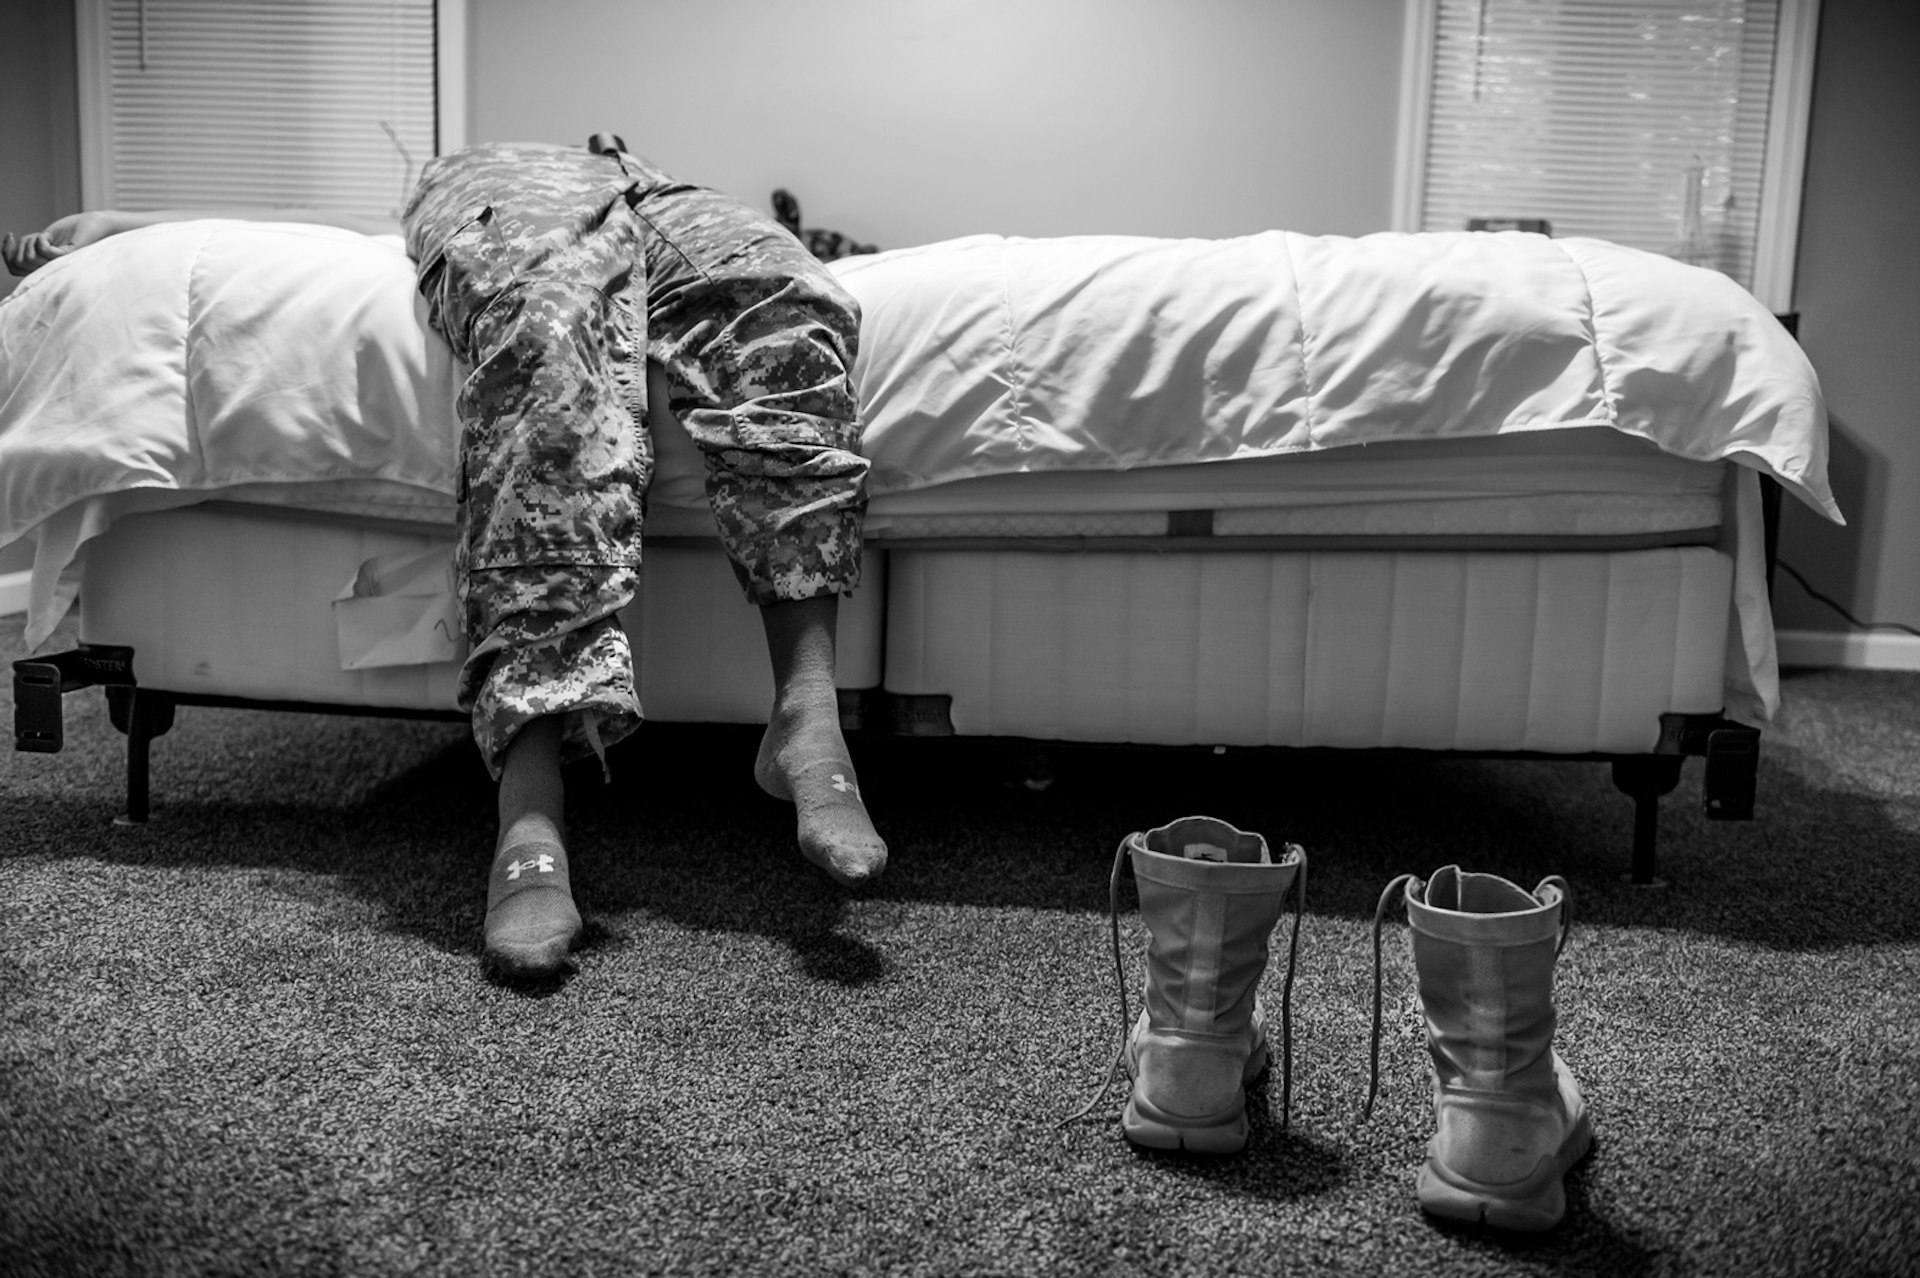 US Army Spc. Natasha Schuette, 21, was sexually assaulted by her drill sergeant during basic training and was subsequently harassed by other drill sergeants after reporting the incident at Fort Jackson, South Carolina. Photo: Mary F. Calvert.